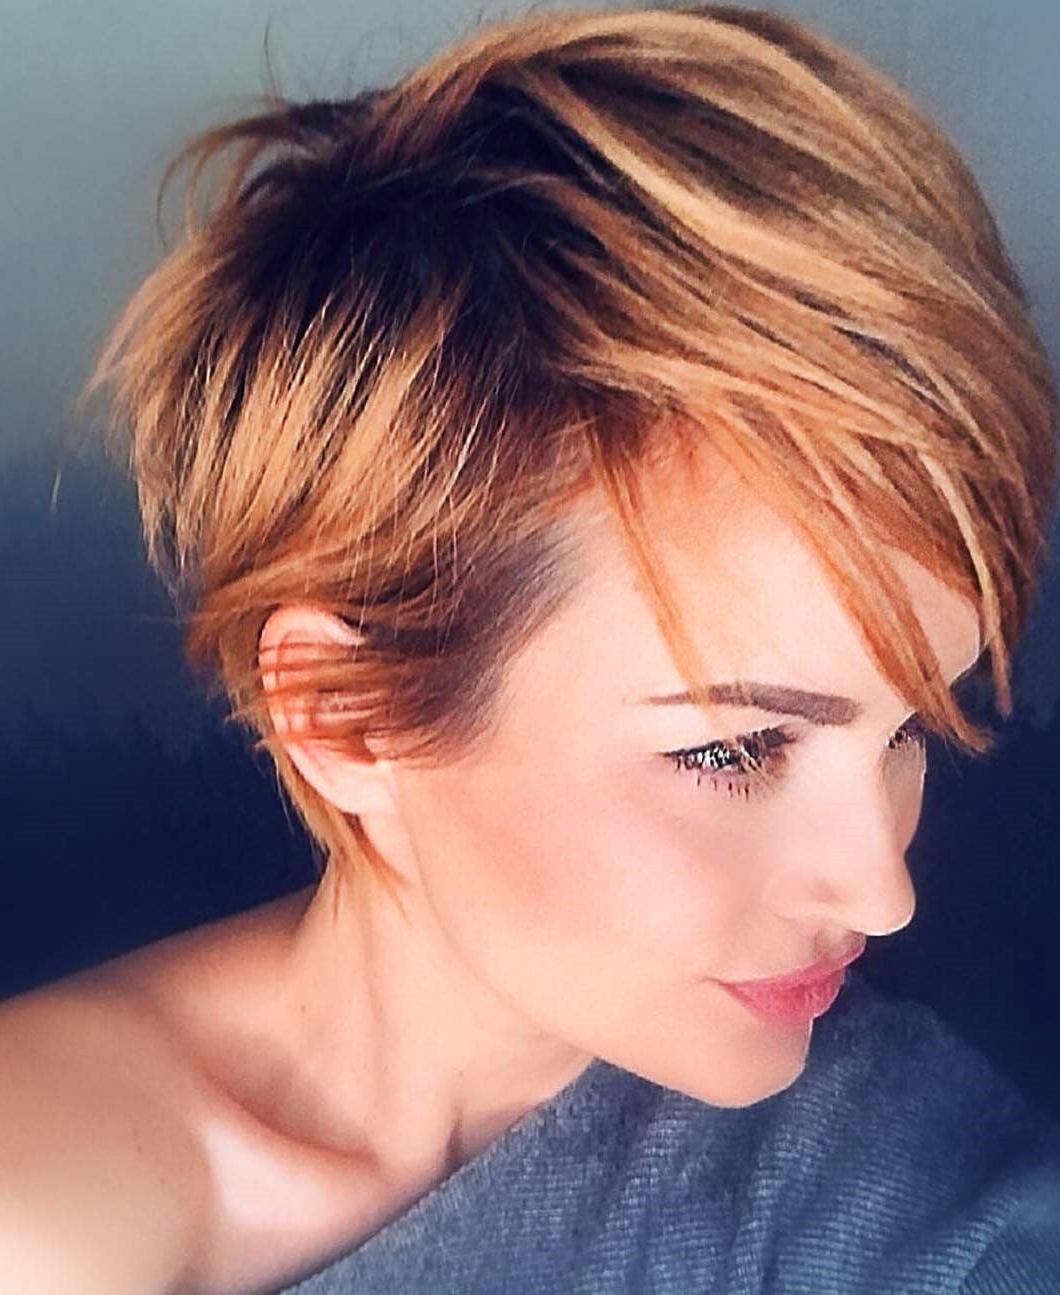 16 edgy hairstyles Short ideas